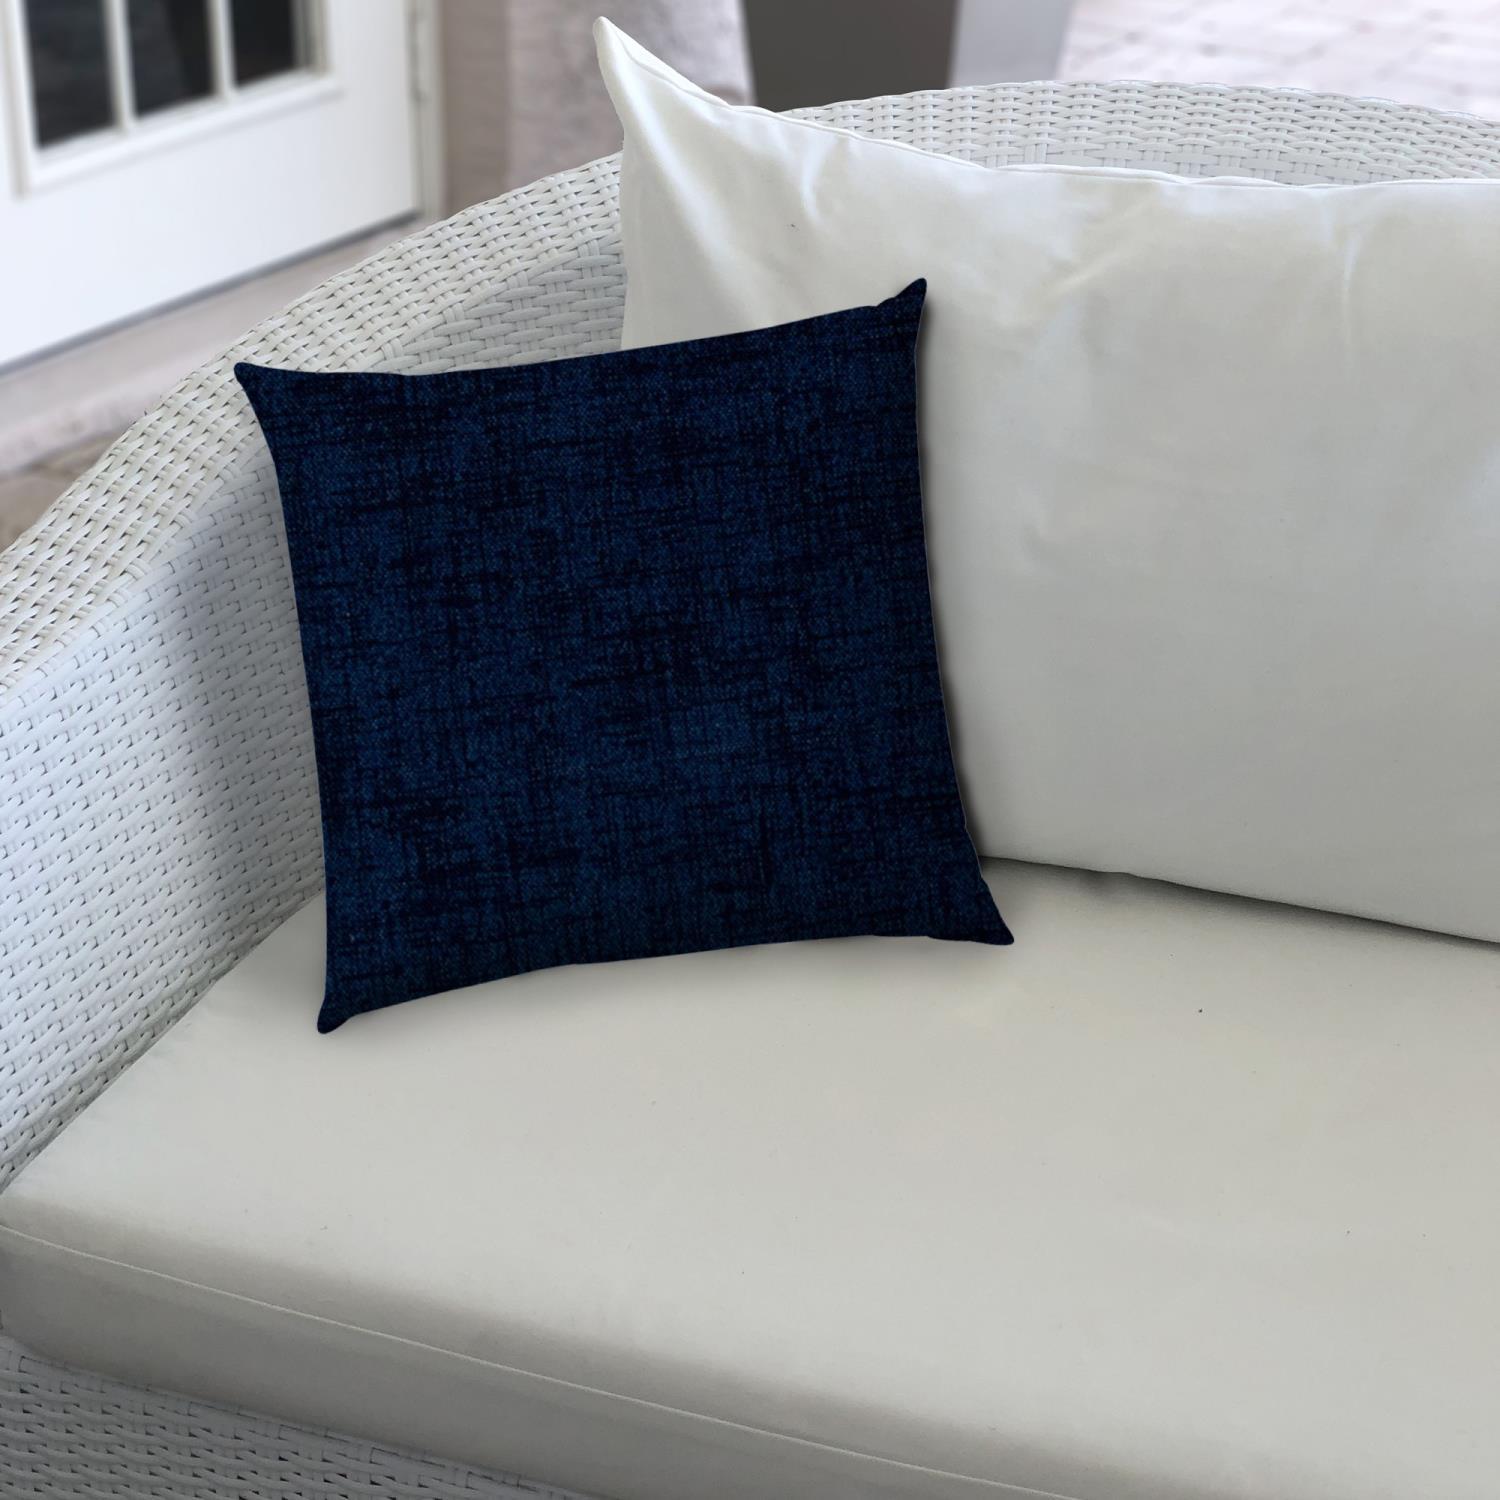 Joita Home Indoor/Outdoor Pillows Sewn Closure with stuffing JOJC4328200A